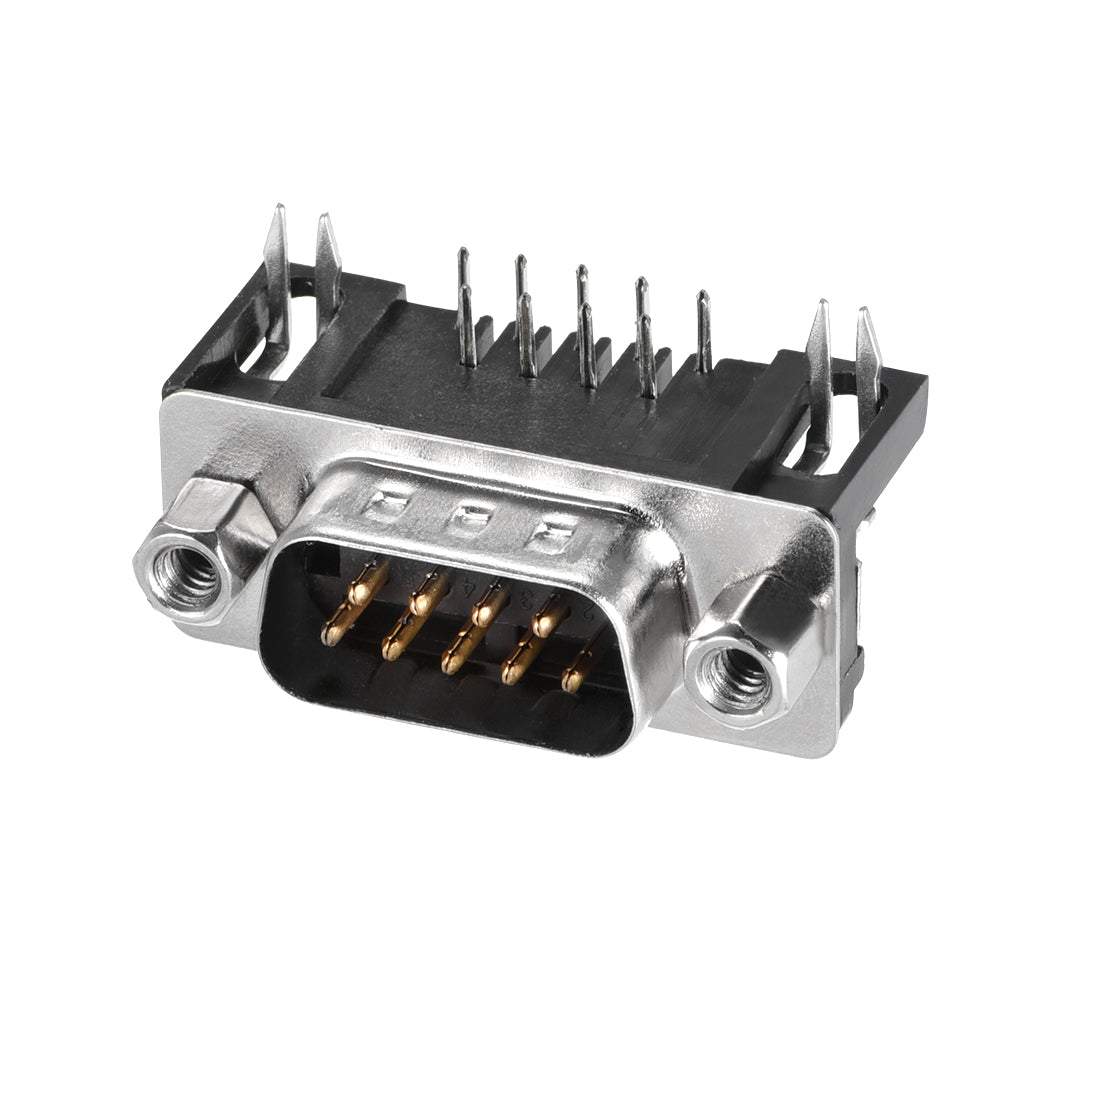 uxcell Uxcell D-sub Connector Male Plug 9-pin 2-row Right Angle Port Terminal Breakout for Mechanical Equipment 20pcs